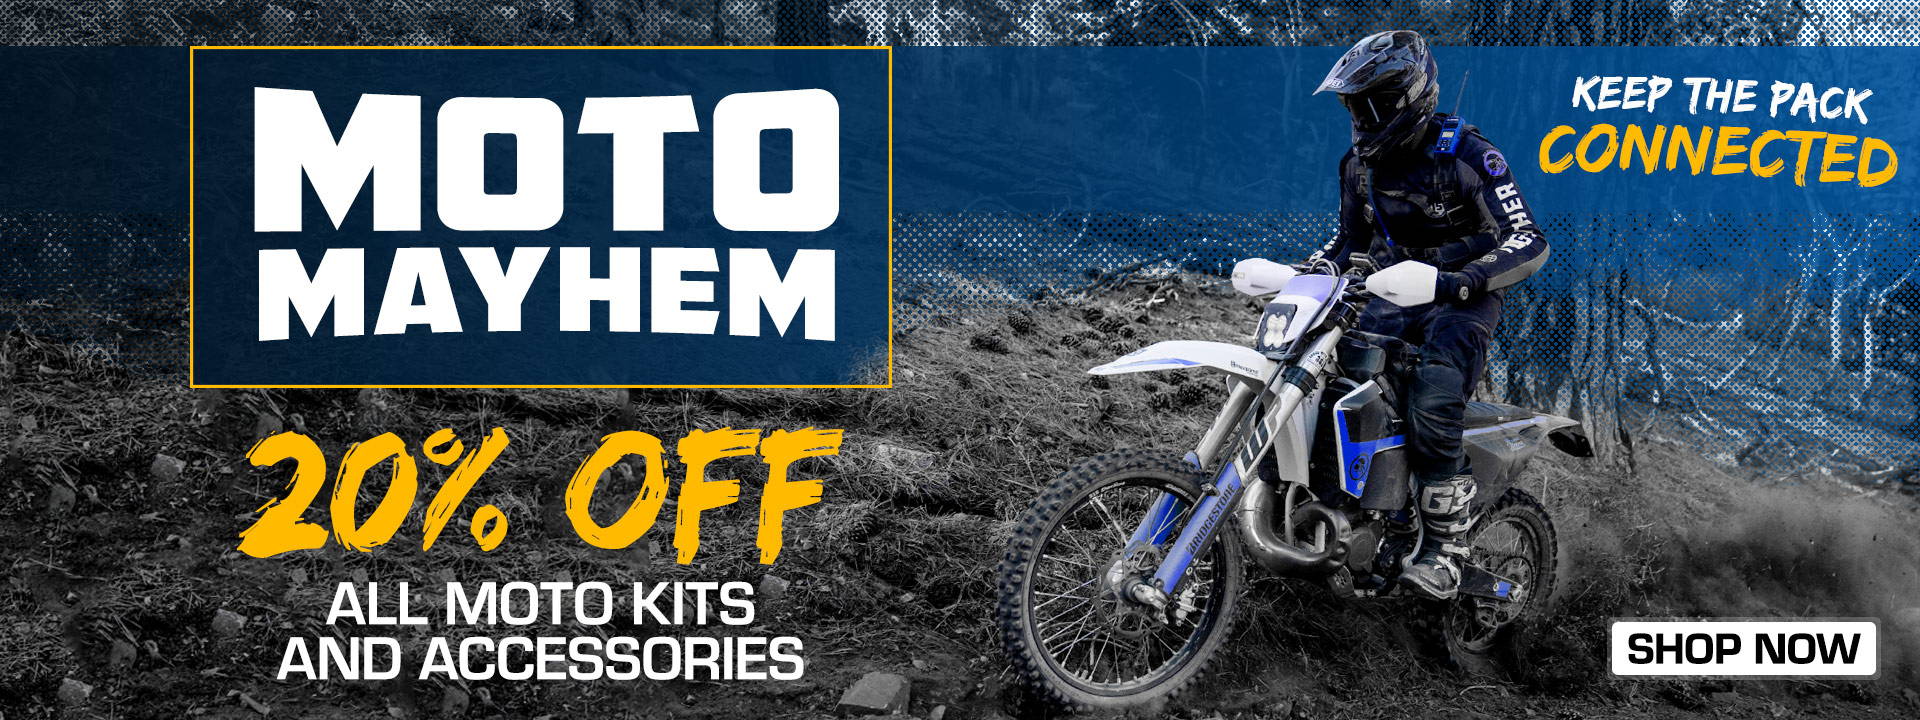 Moto Mayhem, all Moto Kits and Accessories are on sale!